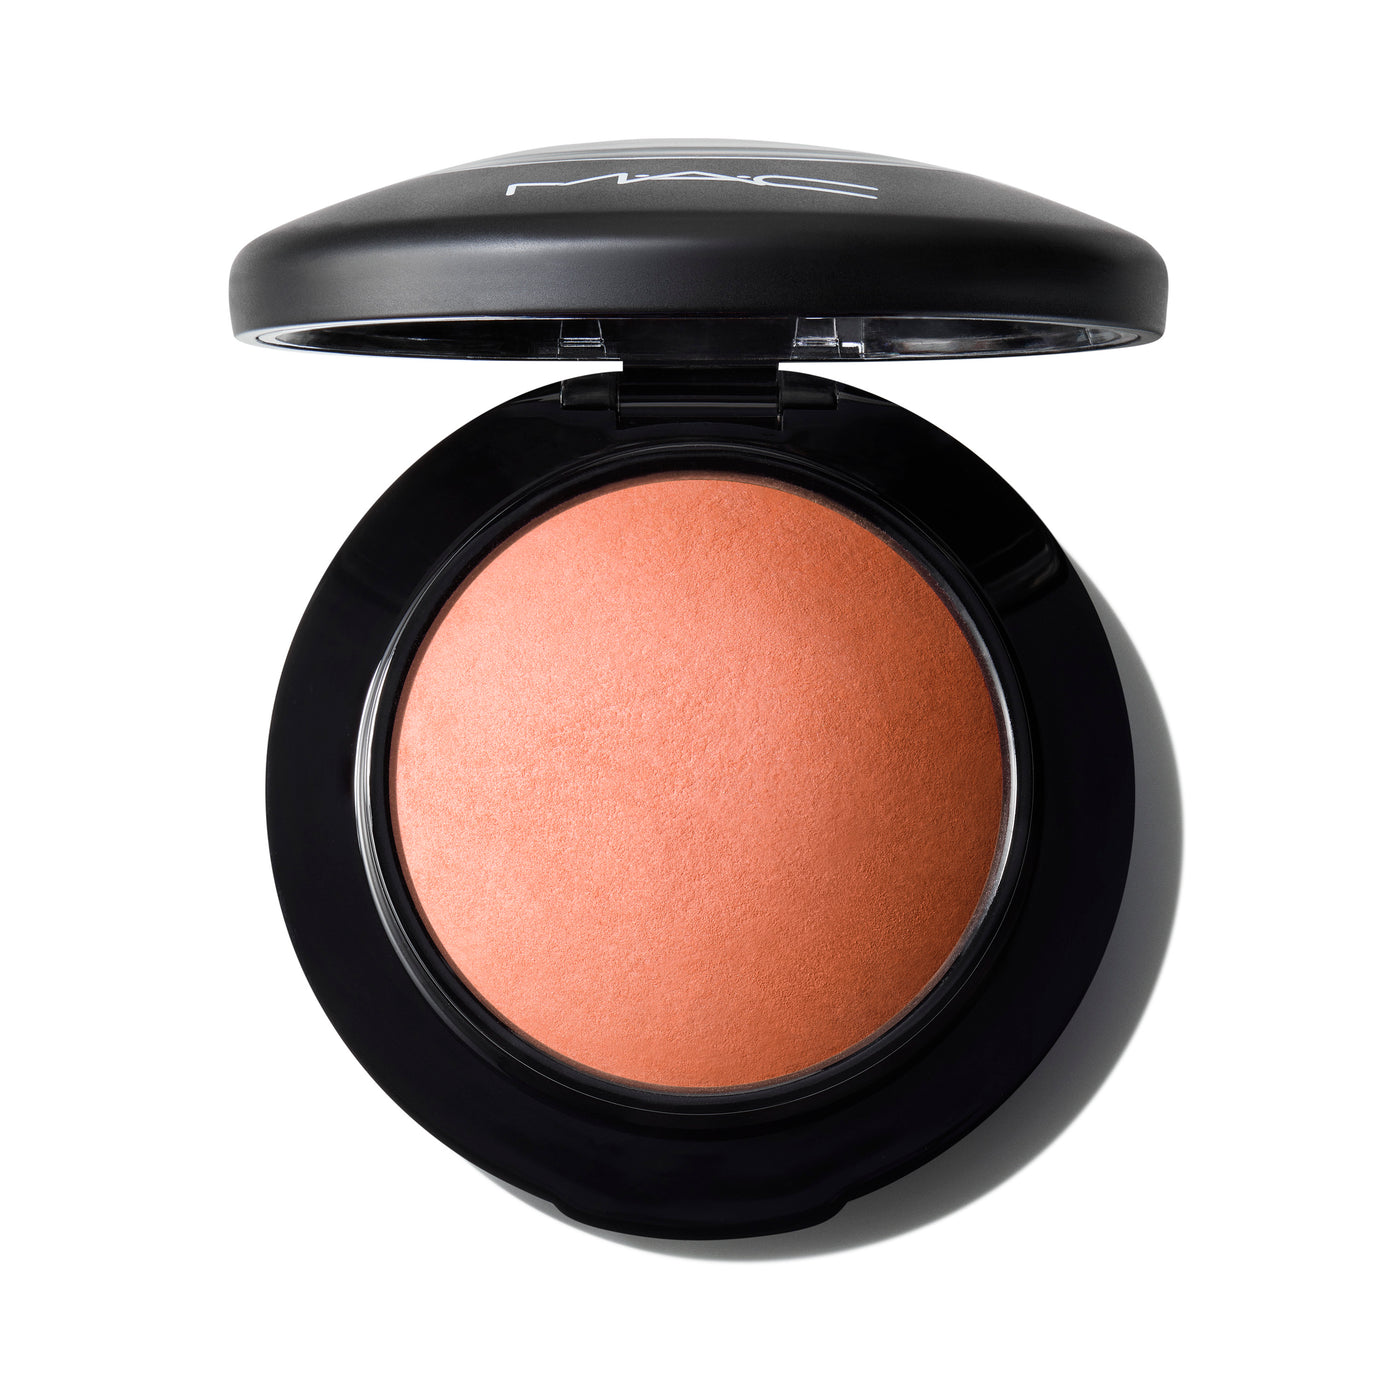 Shop The Latest Collection Of Mâ·Aâ·C Mineralize Blush In Lebanon